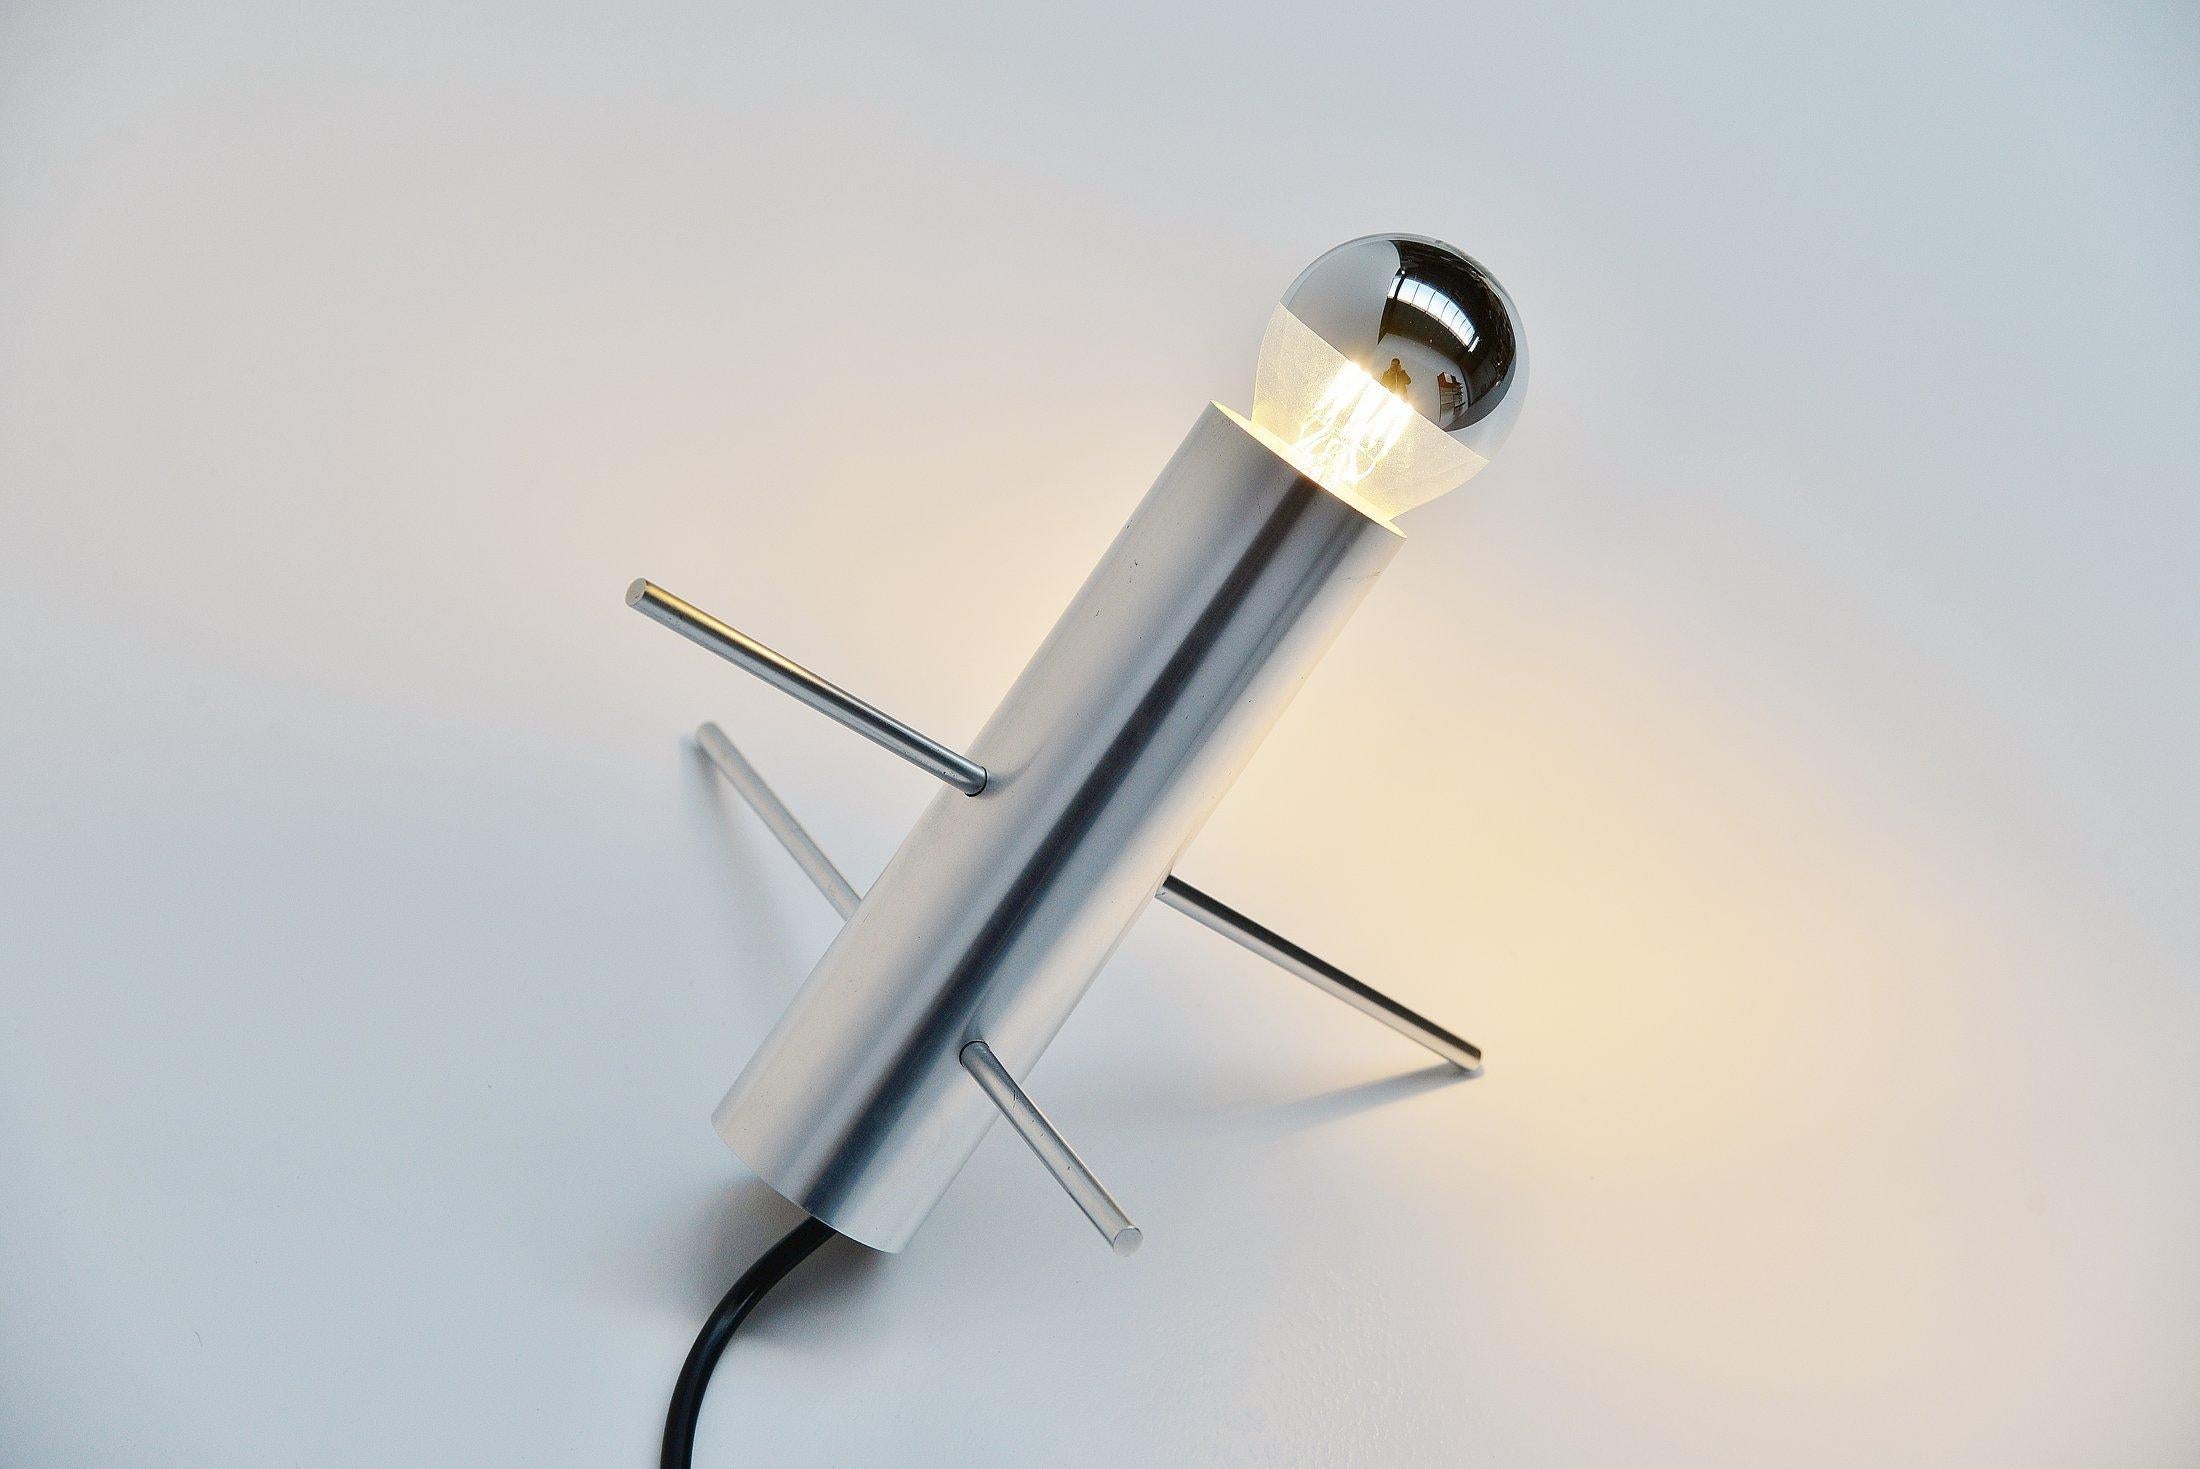 Fantastic Minimalist table lamp designed by Otto Wach and manufactured by RAAK Amsterdam, Holland 1960. This is for sure one of my favourite designs from the RAAK collection. The lamp is highly decorative and yet so simple. Made of an aluminium tube